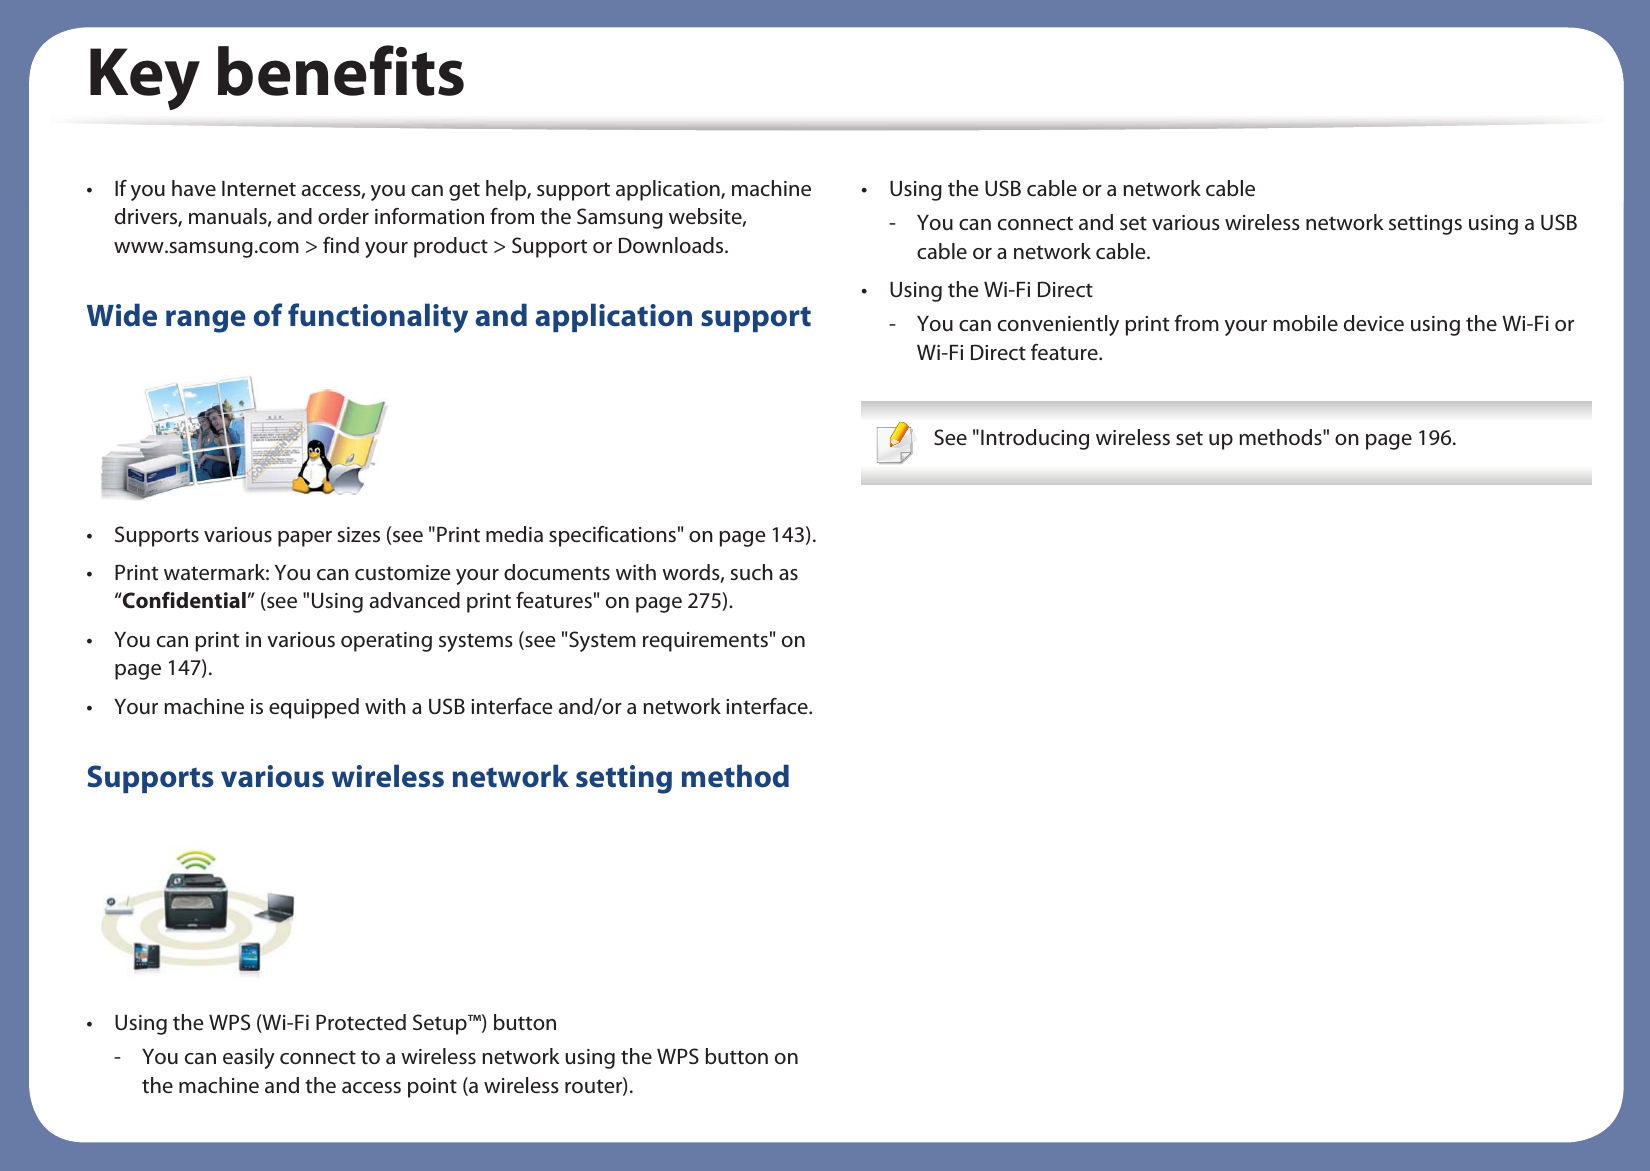 Key benefits• If you have Internet access, you can get help, support application, machine drivers, manuals, and order information from the Samsung website, www.samsung.com &gt; find your product &gt; Support or Downloads.Wide range of functionality and application support• Supports various paper sizes (see &quot;Print media specifications&quot; on page 143).• Print watermark: You can customize your documents with words, such as “Confidential” (see &quot;Using advanced print features&quot; on page 275).• You can print in various operating systems (see &quot;System requirements&quot; on page 147).• Your machine is equipped with a USB interface and/or a network interface.Supports various wireless network setting method • Using the WPS (Wi-Fi Protected Setup™) button- You can easily connect to a wireless network using the WPS button on the machine and the access point (a wireless router).• Using the USB cable or a network cable- You can connect and set various wireless network settings using a USB cable or a network cable.• Using the Wi-Fi Direct- You can conveniently print from your mobile device using the Wi-Fi or Wi-Fi Direct feature. See &quot;Introducing wireless set up methods&quot; on page 196. 